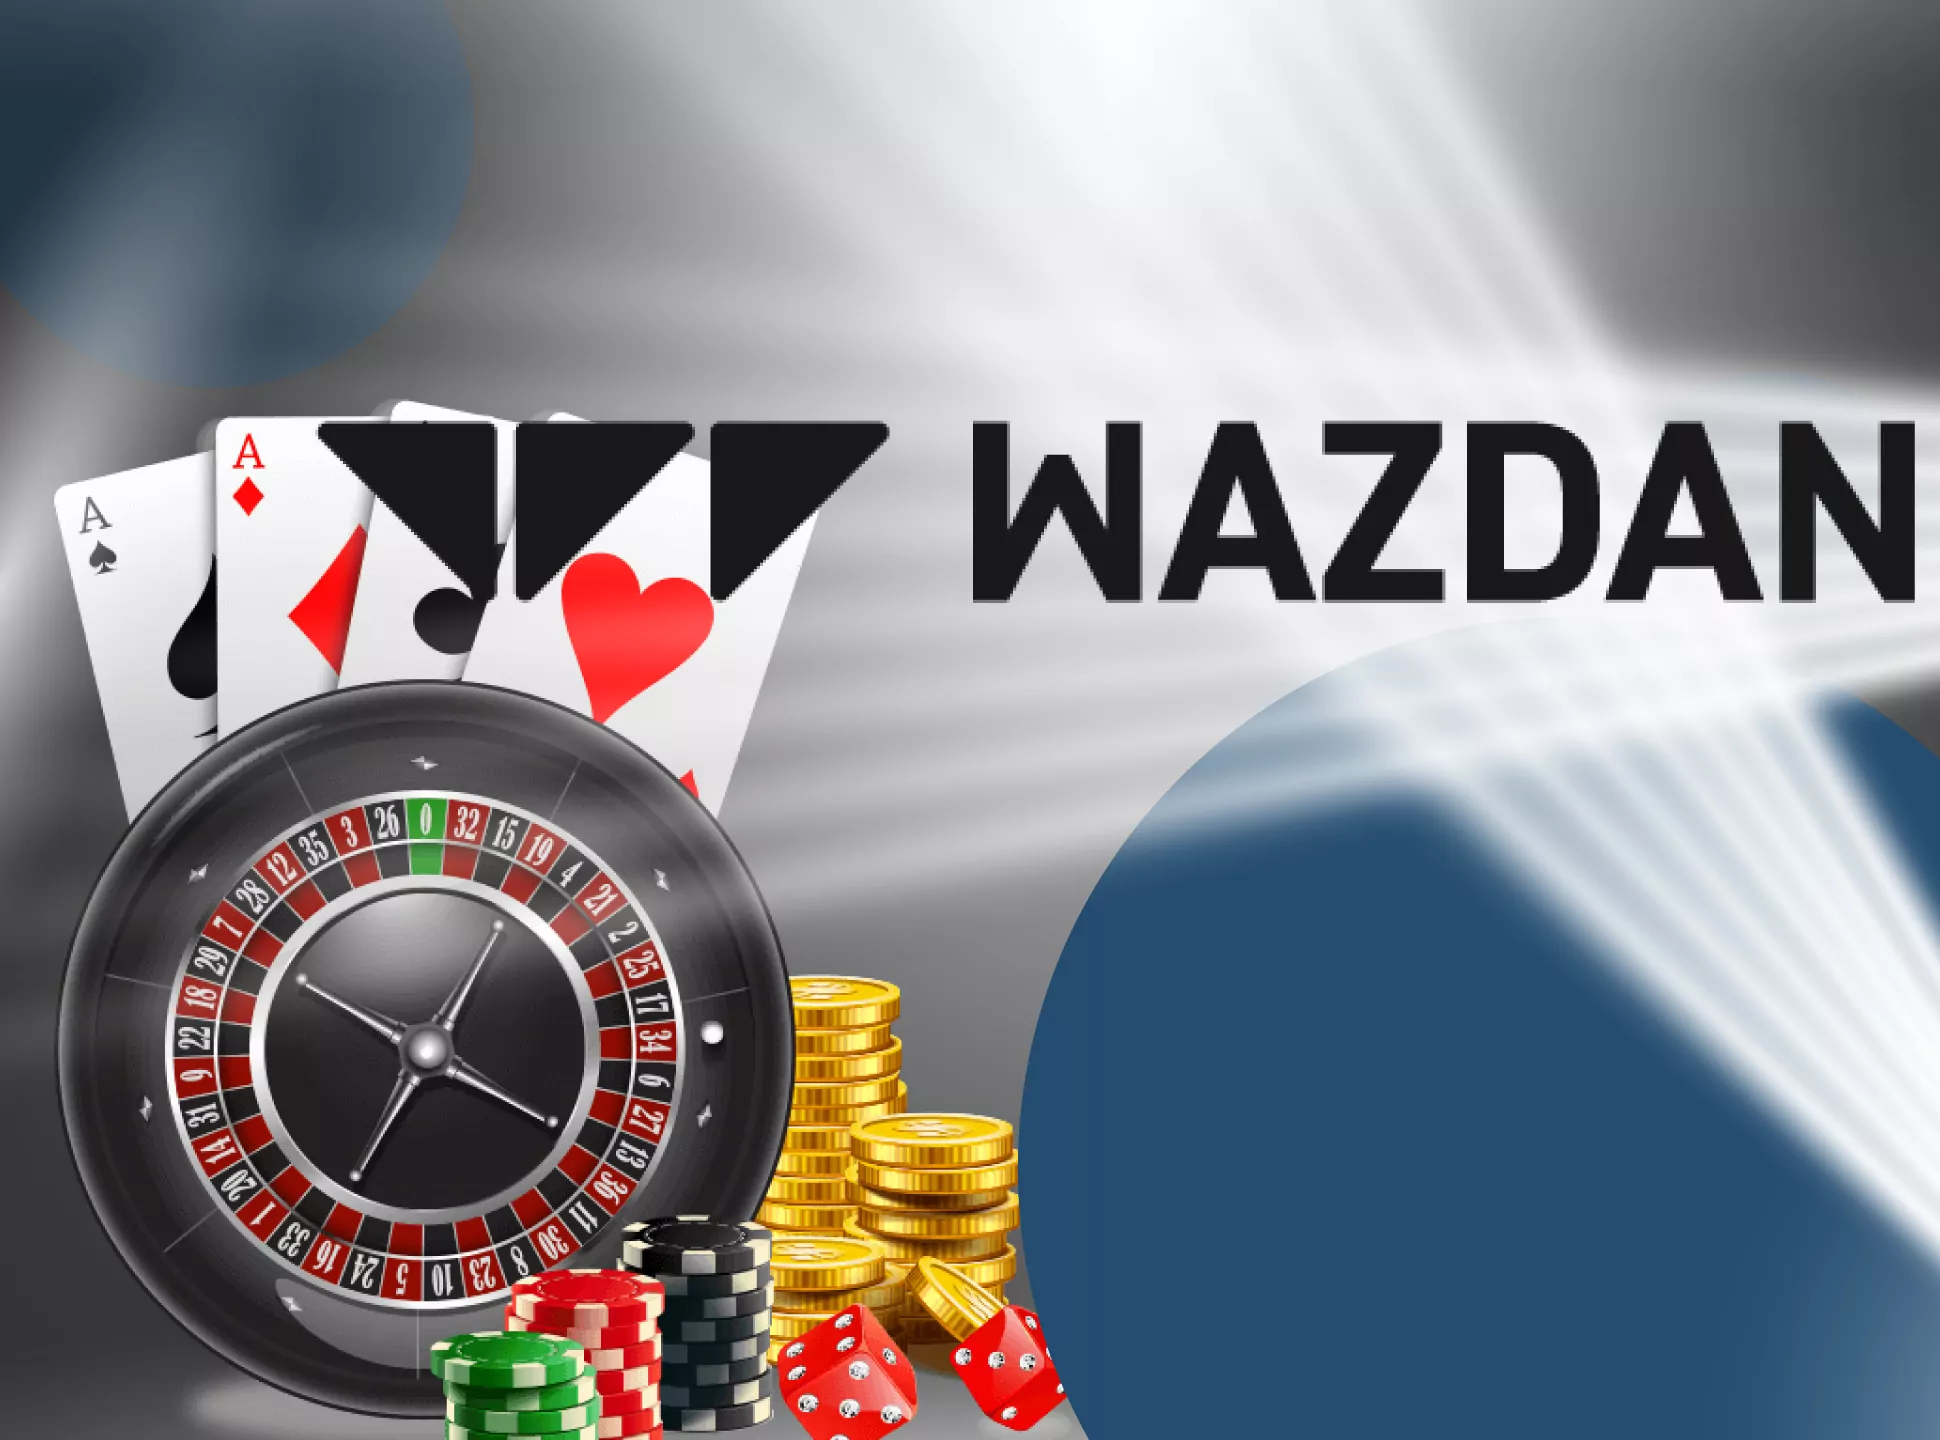 There are various games from Wazdan in the Mostbet app.